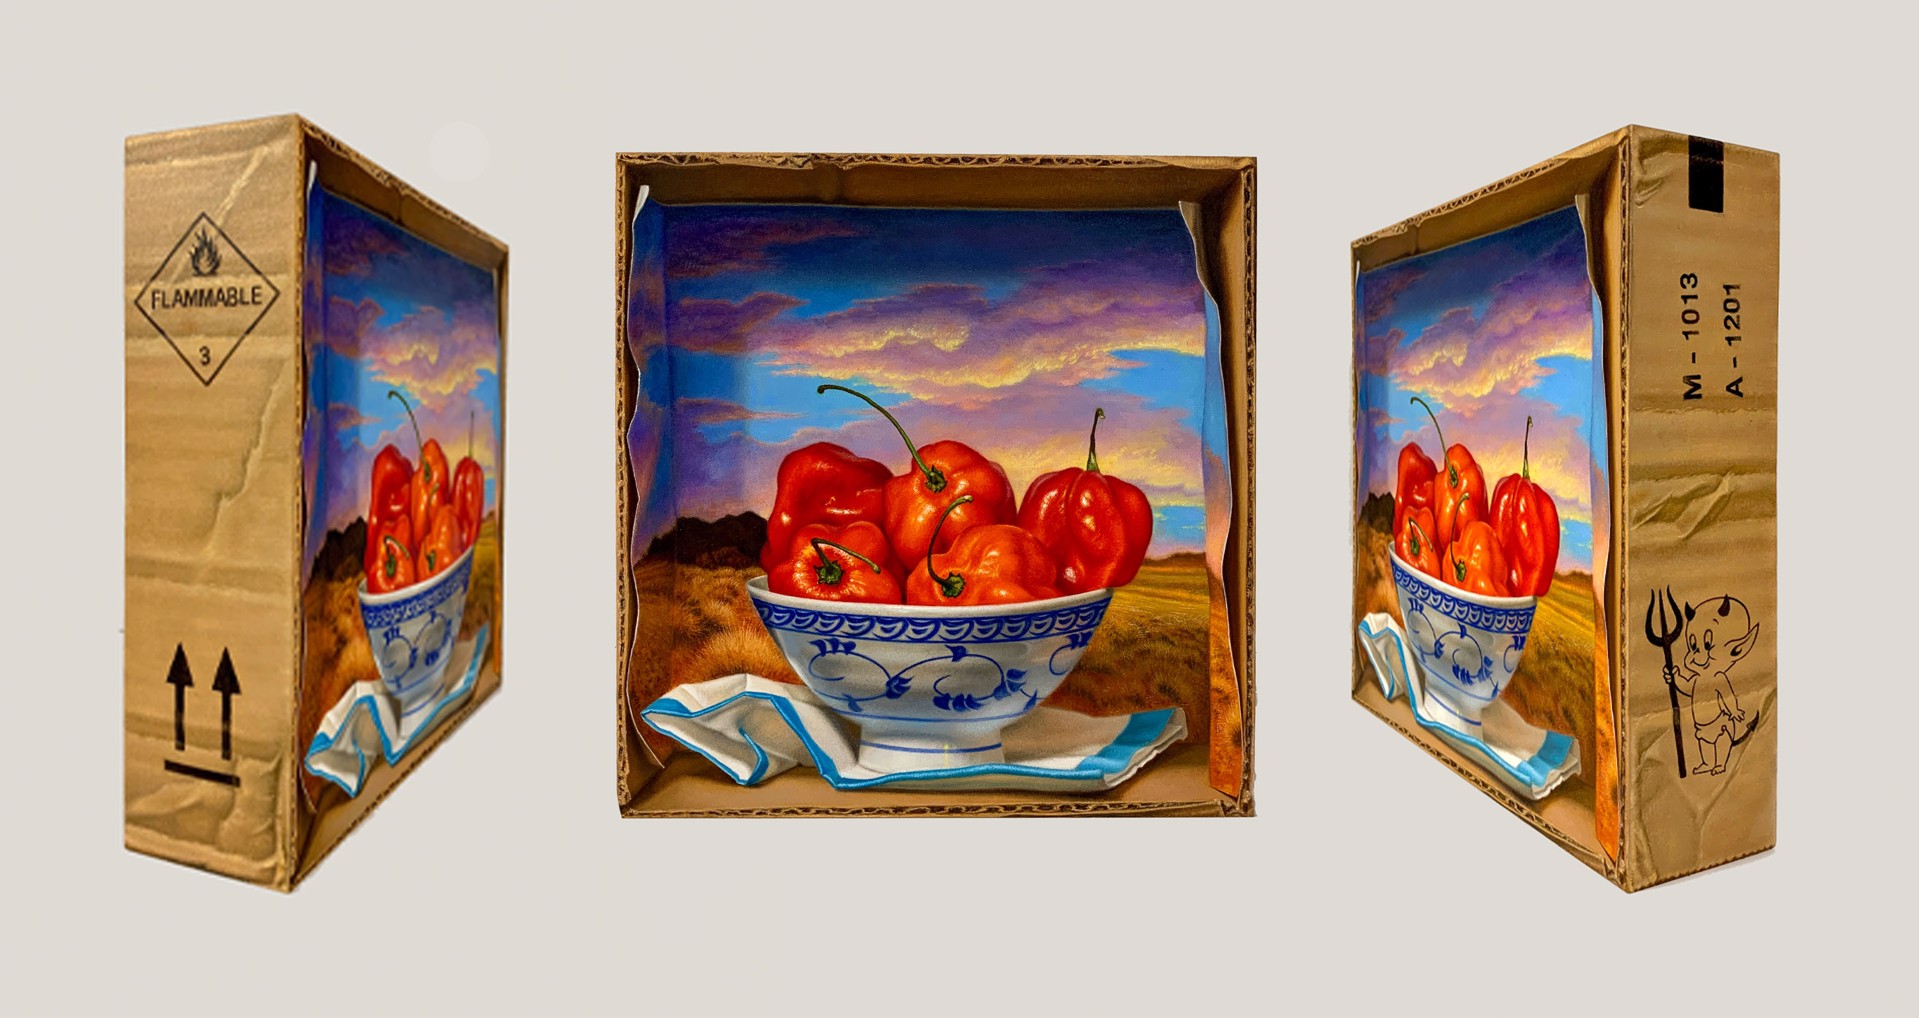 Habaneros Peppers in a Landscape by Natalie Featherston